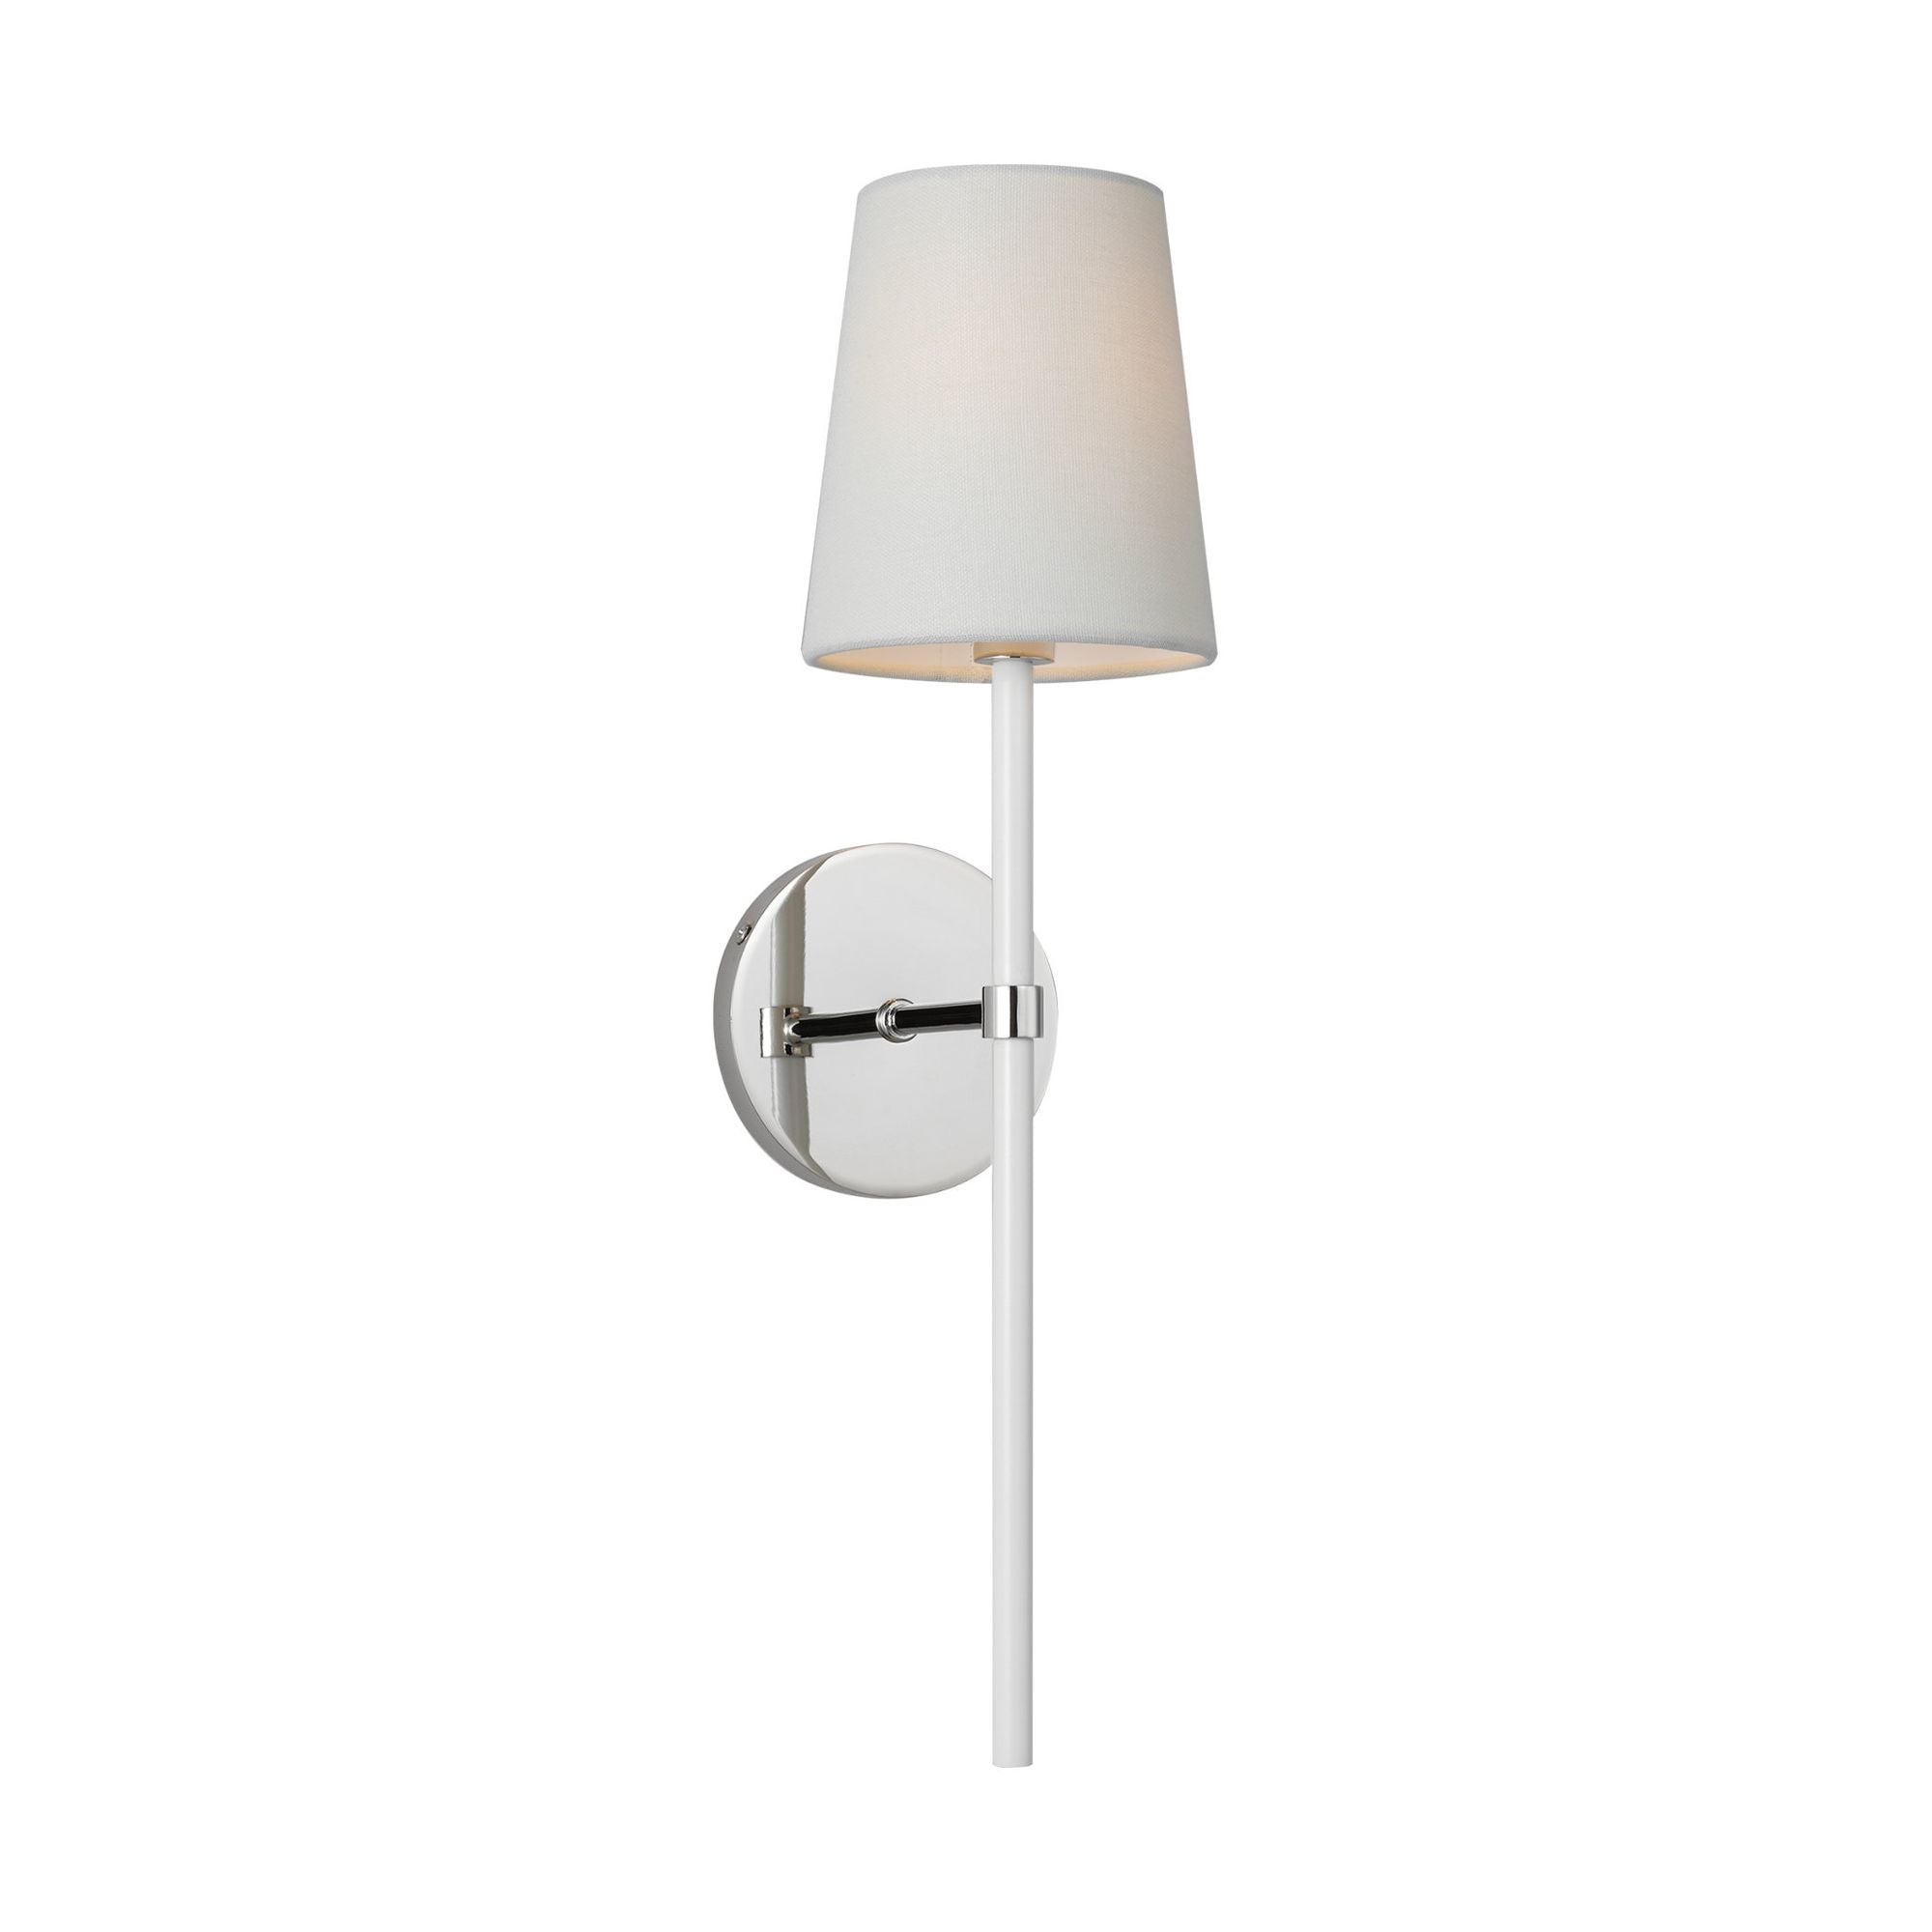 kate spade new york Monroe Tail Sconce in Polished Nickel